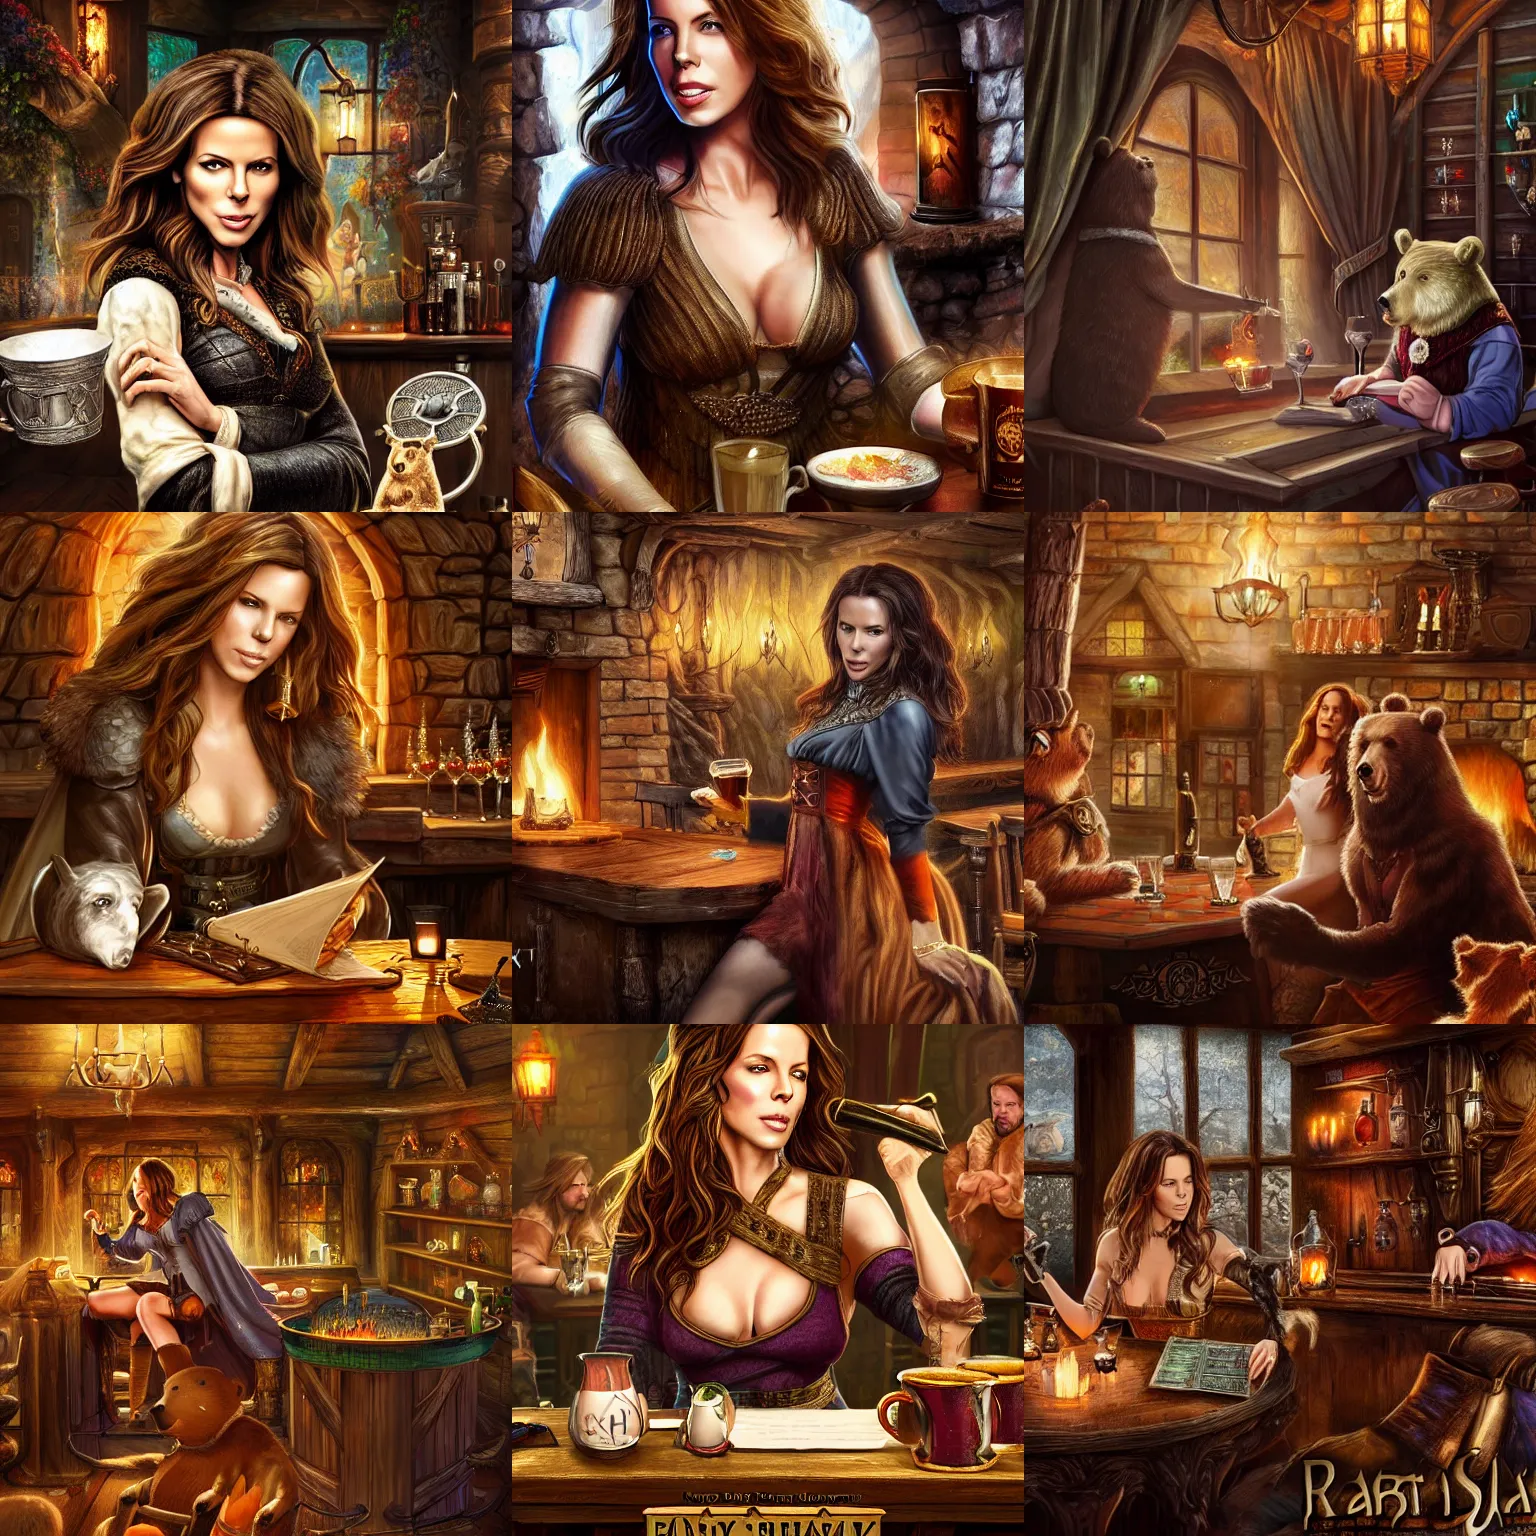 Prompt: kate beckinsale play music on arph, sit in fantasy tavern near fireplace, behind bar deck with bear mugs, medieval dnd, colorfull digital fantasy art, 4k